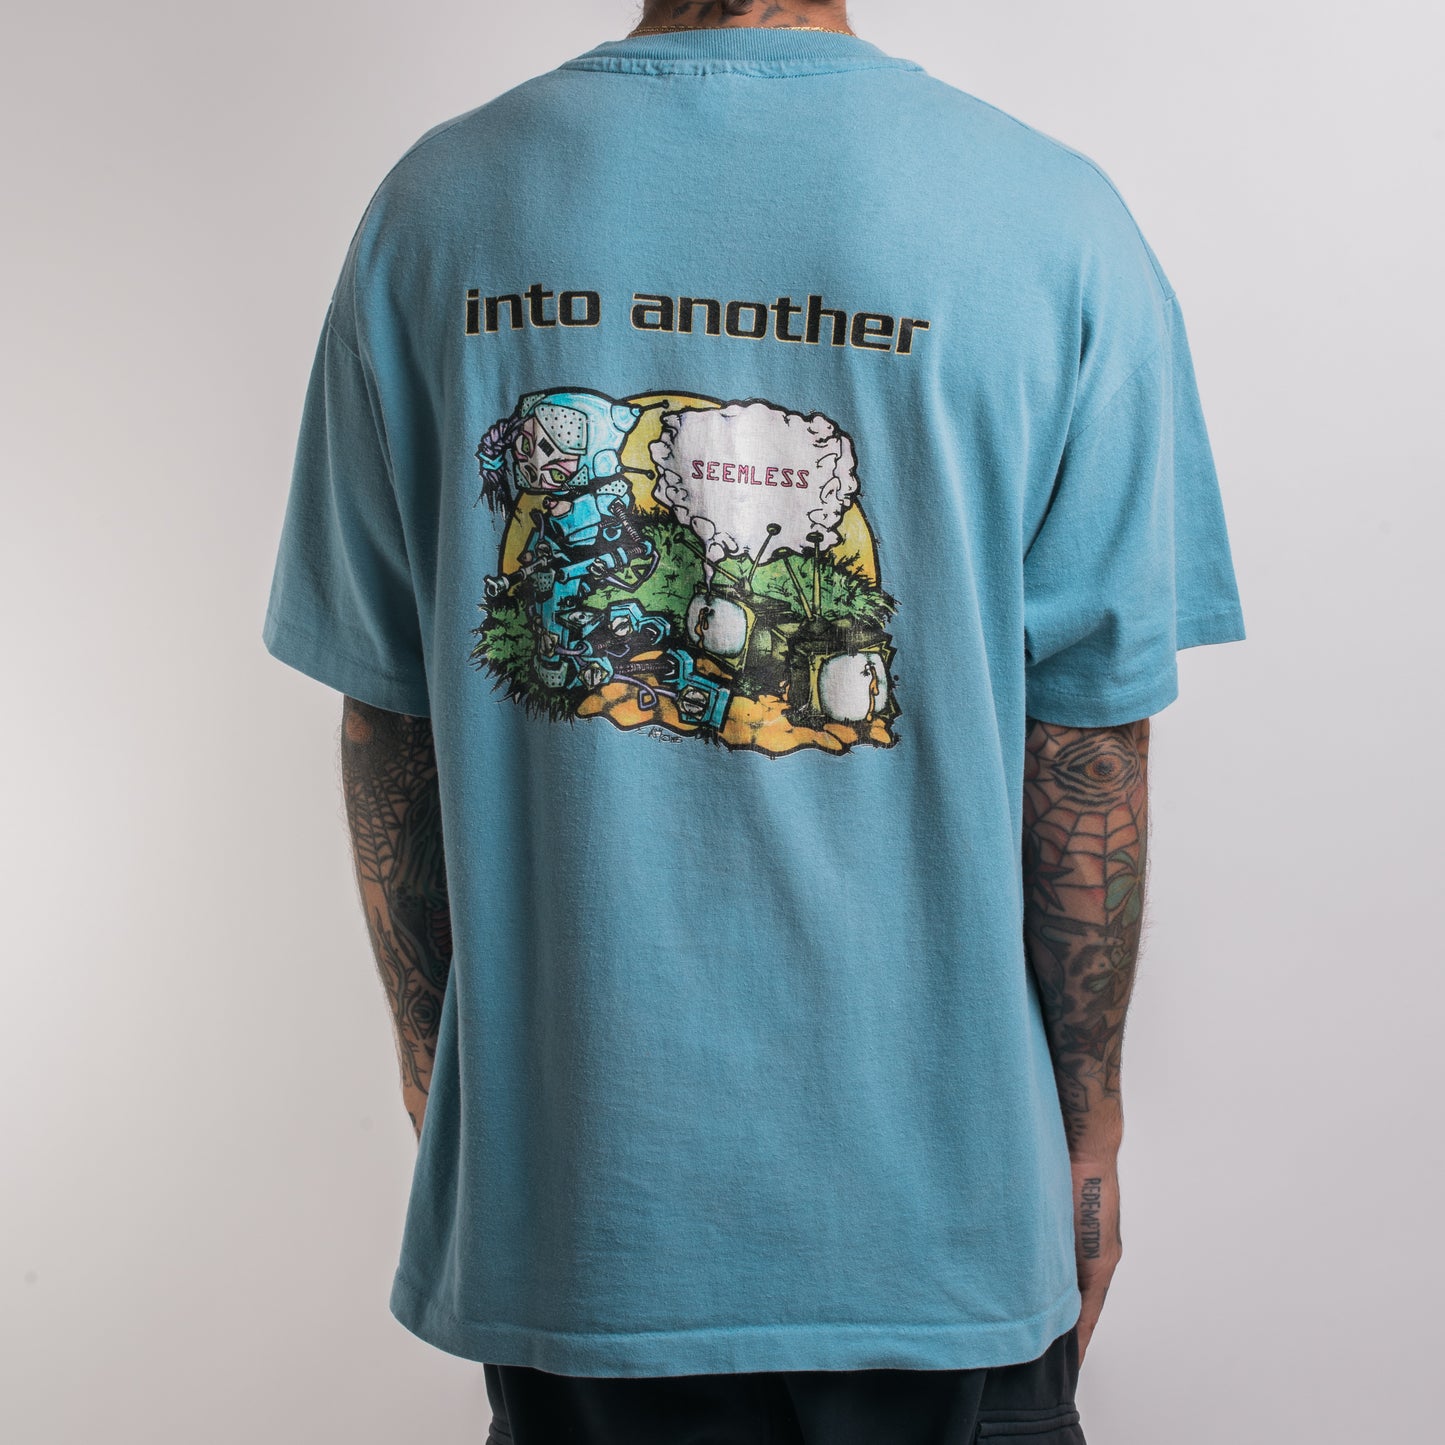 Vintage 90’s Into Another Seamless T-Shirt